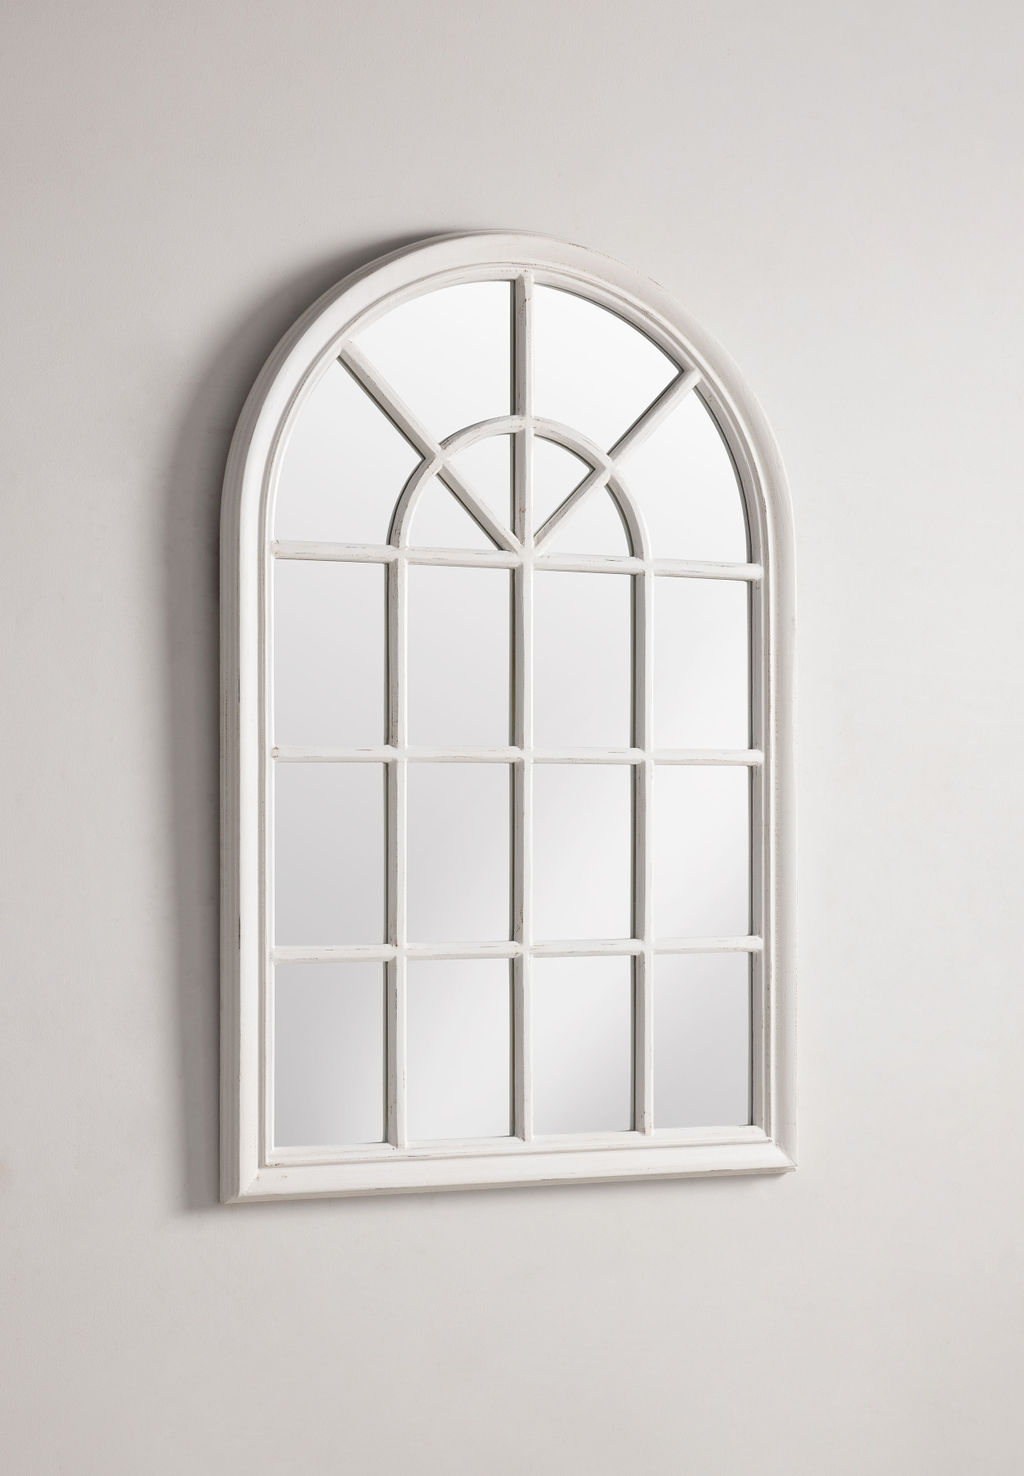 Block & Chisel cathedral styled mirror with white distressed wooden frame